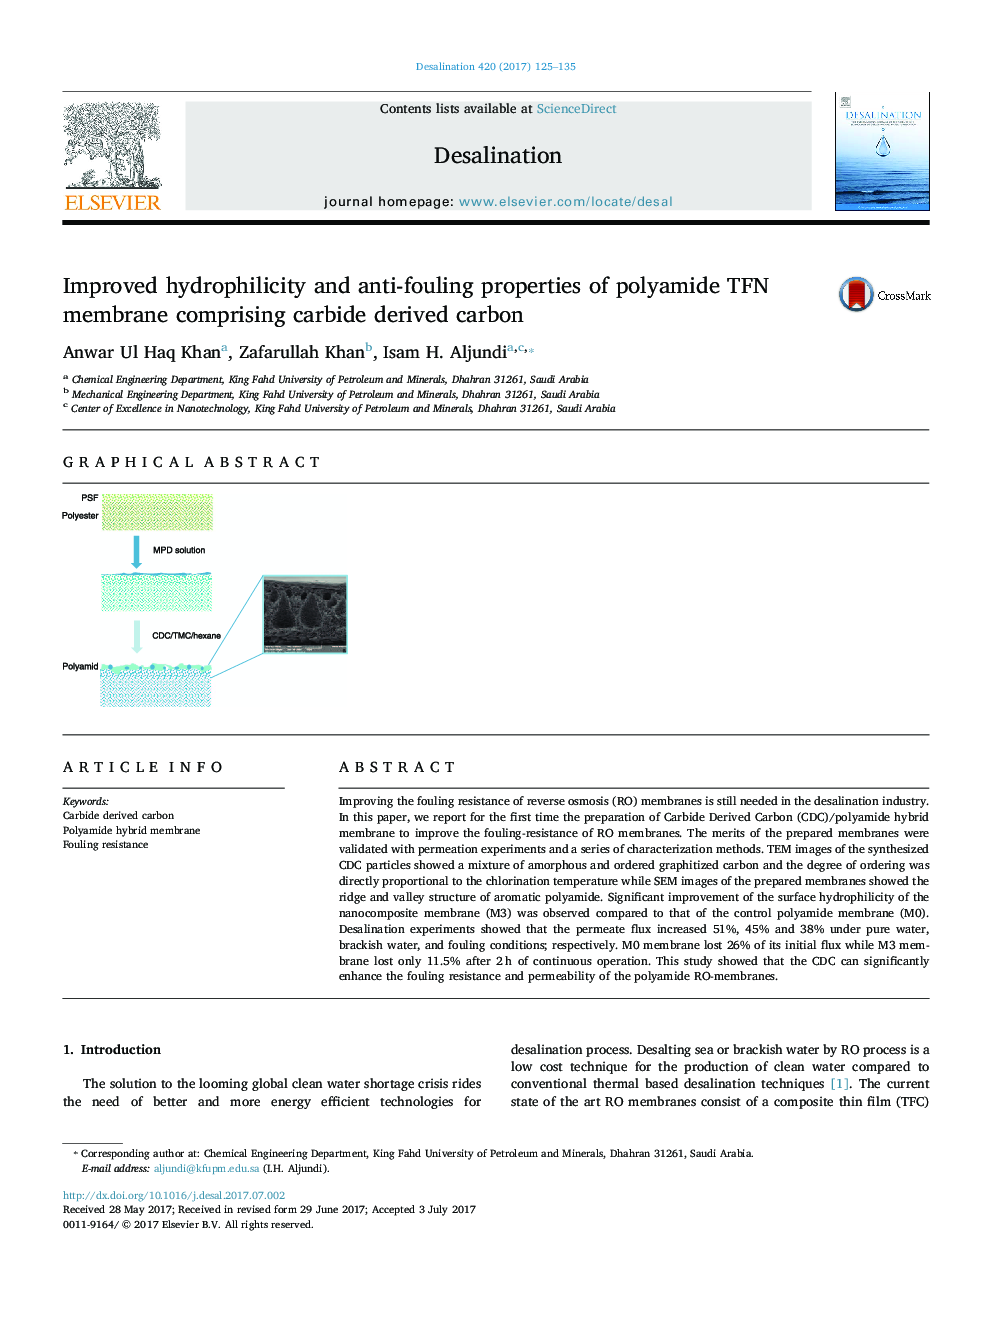 Improved hydrophilicity and anti-fouling properties of polyamide TFN membrane comprising carbide derived carbon